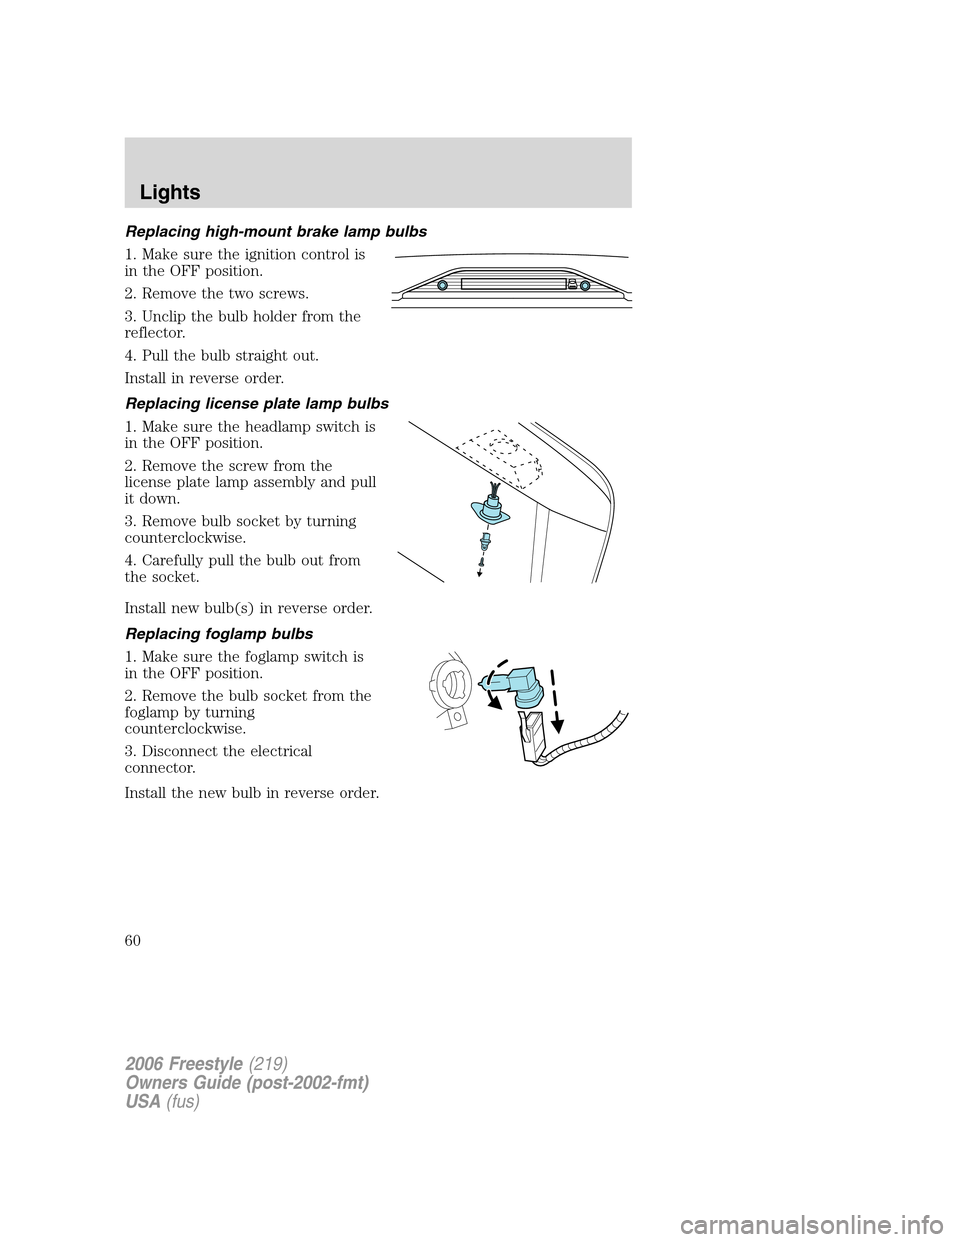 FORD FREESTYLE 2006 1.G Owners Manual Replacing high-mount brake lamp bulbs
1. Make sure the ignition control is
in the OFF position.
2. Remove the two screws.
3. Unclip the bulb holder from the
reflector.
4. Pull the bulb straight out.
I